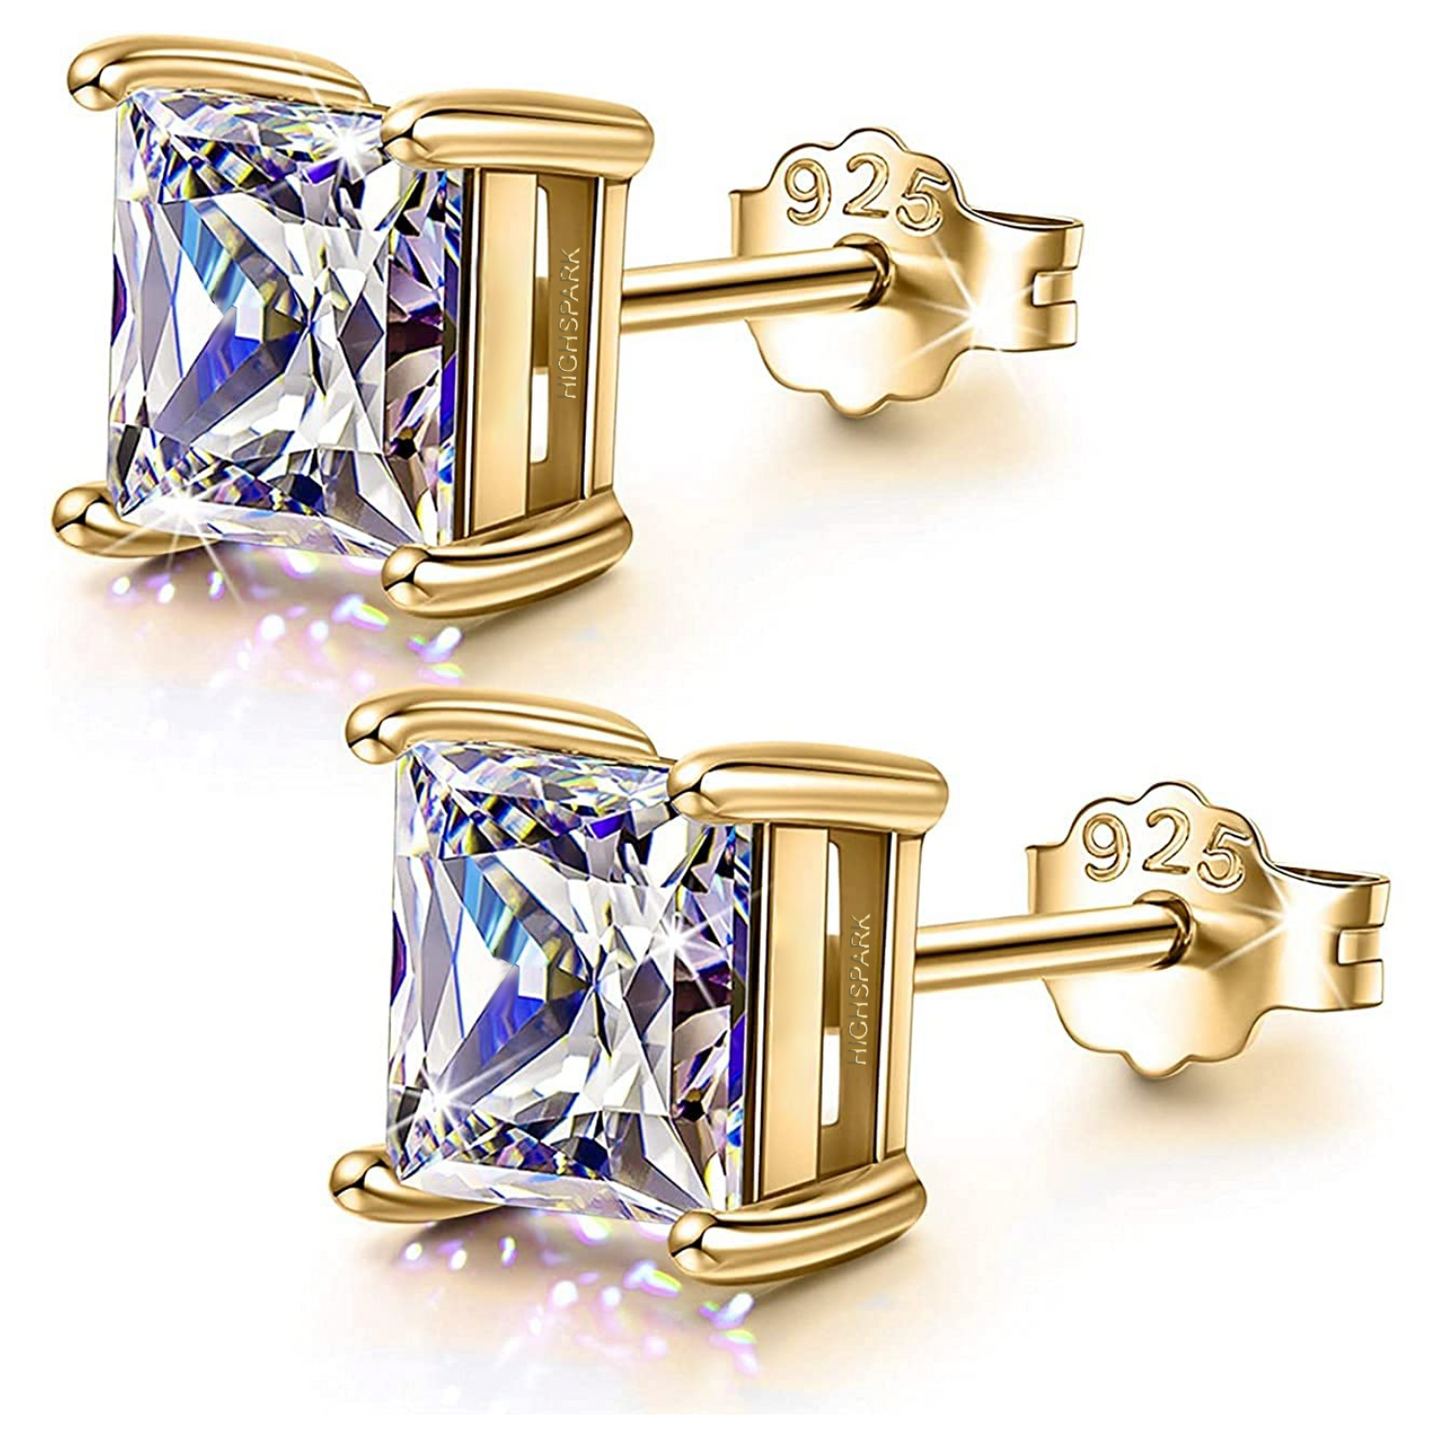 Square Gold Solitaire Earrings in 92.5 Silver embellished with Princess Cut Swarovski Zirconia - 18K Gold Finish